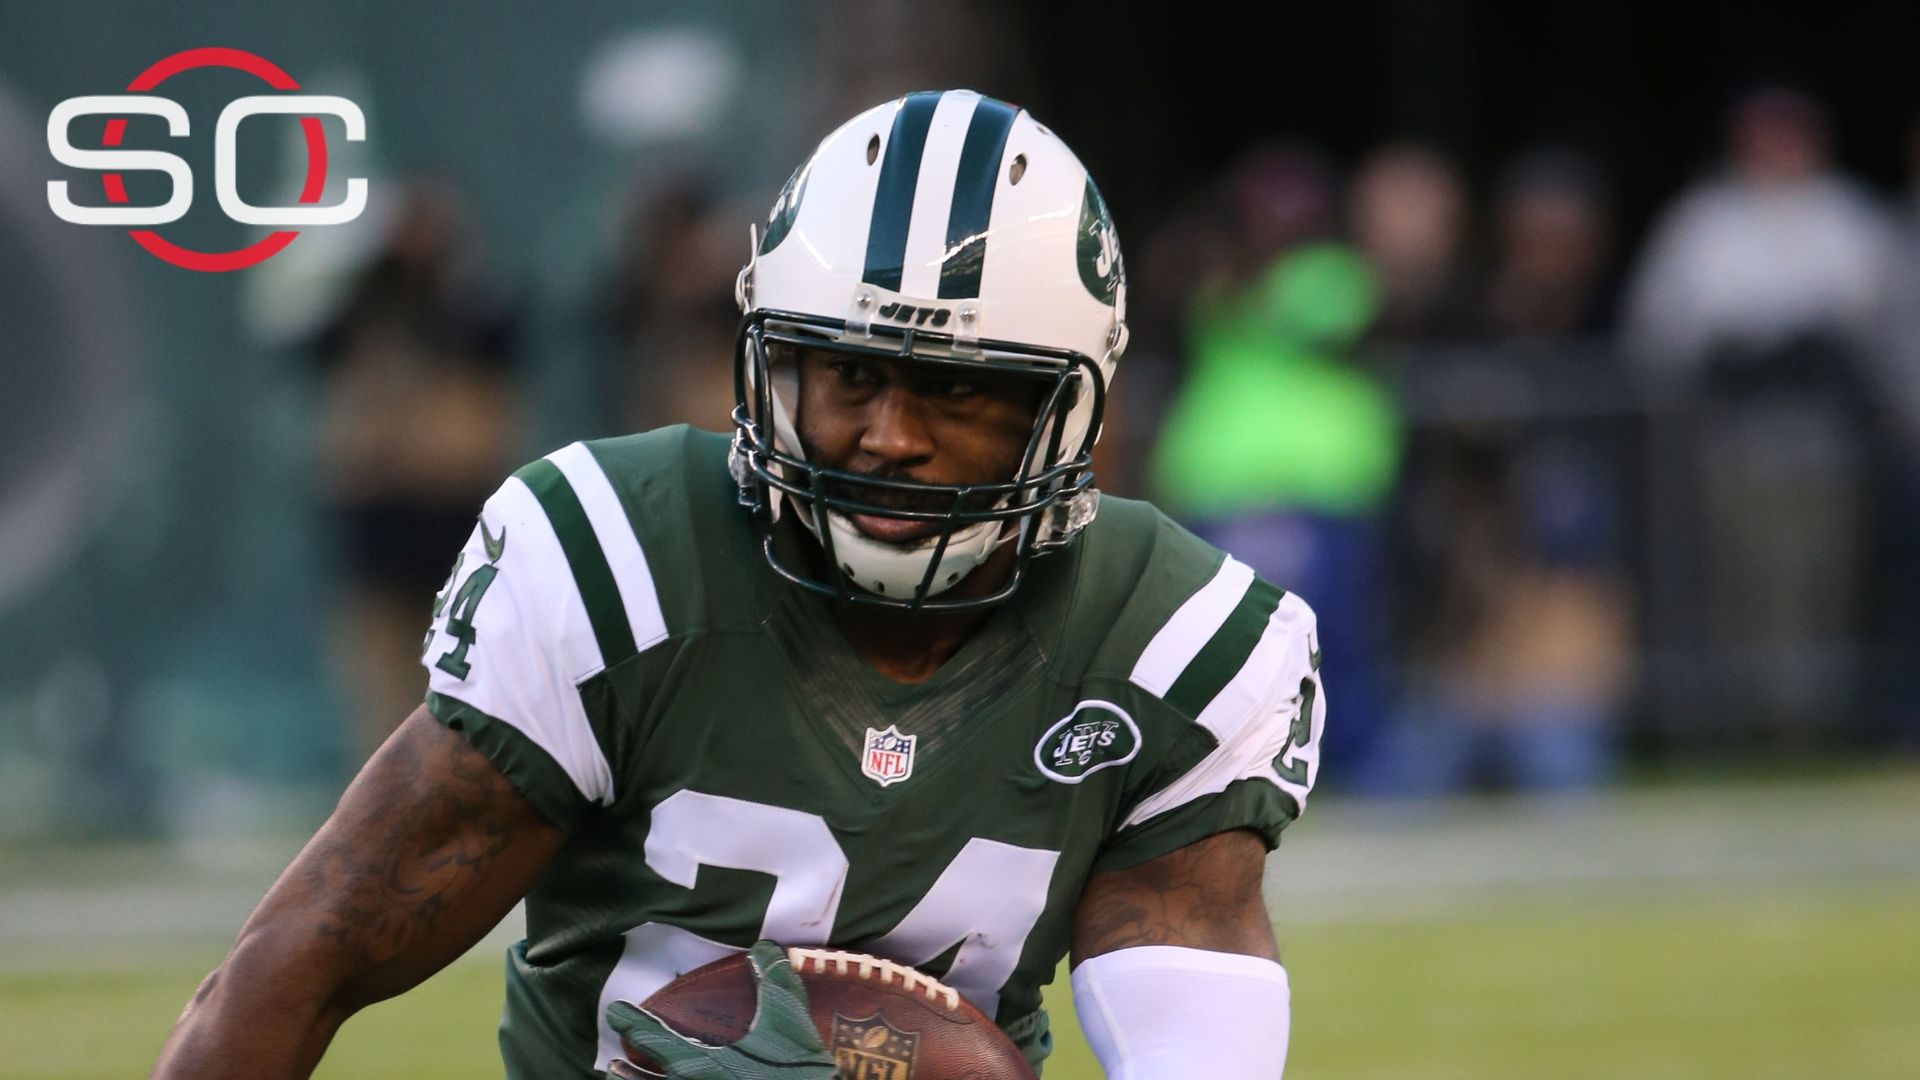 Revis charged in street altercation